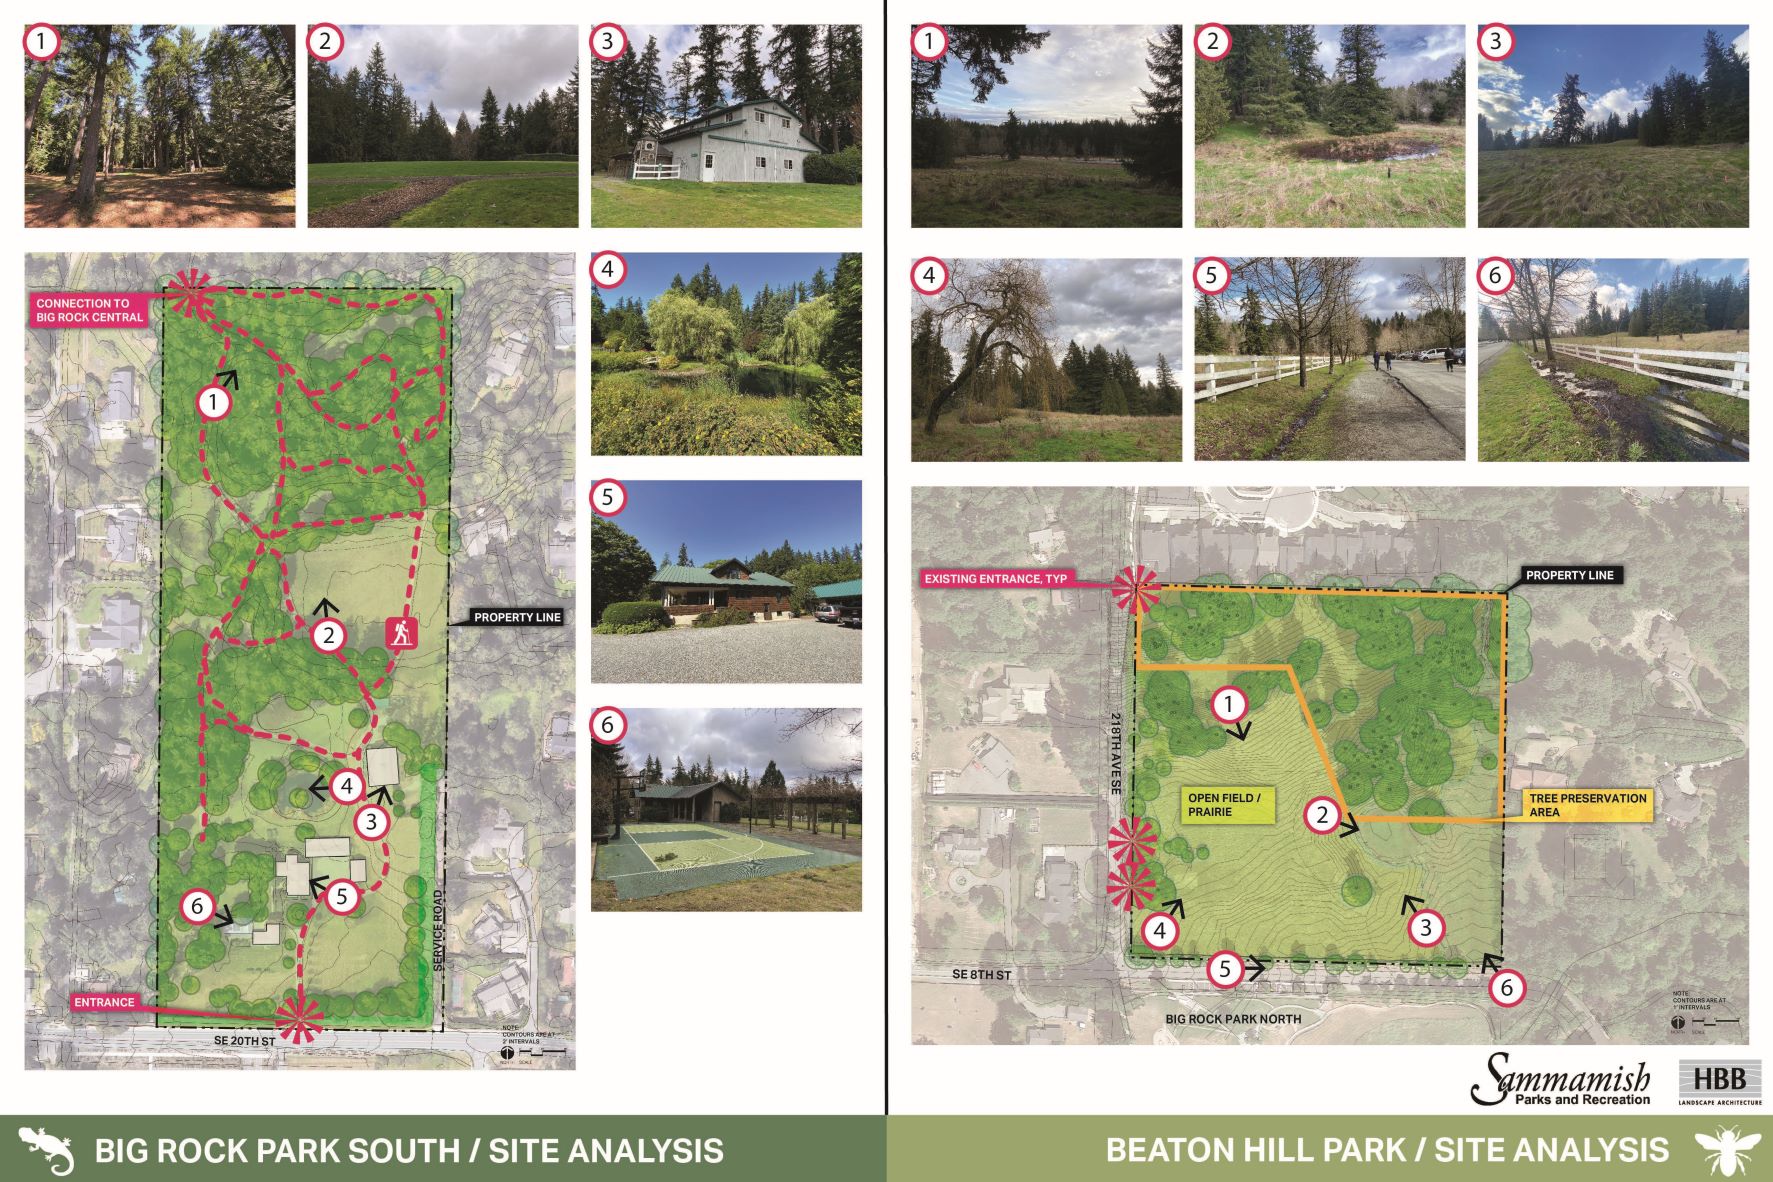 side by side comparison of the two parks, with photos of existing conditions labeled by location on maps